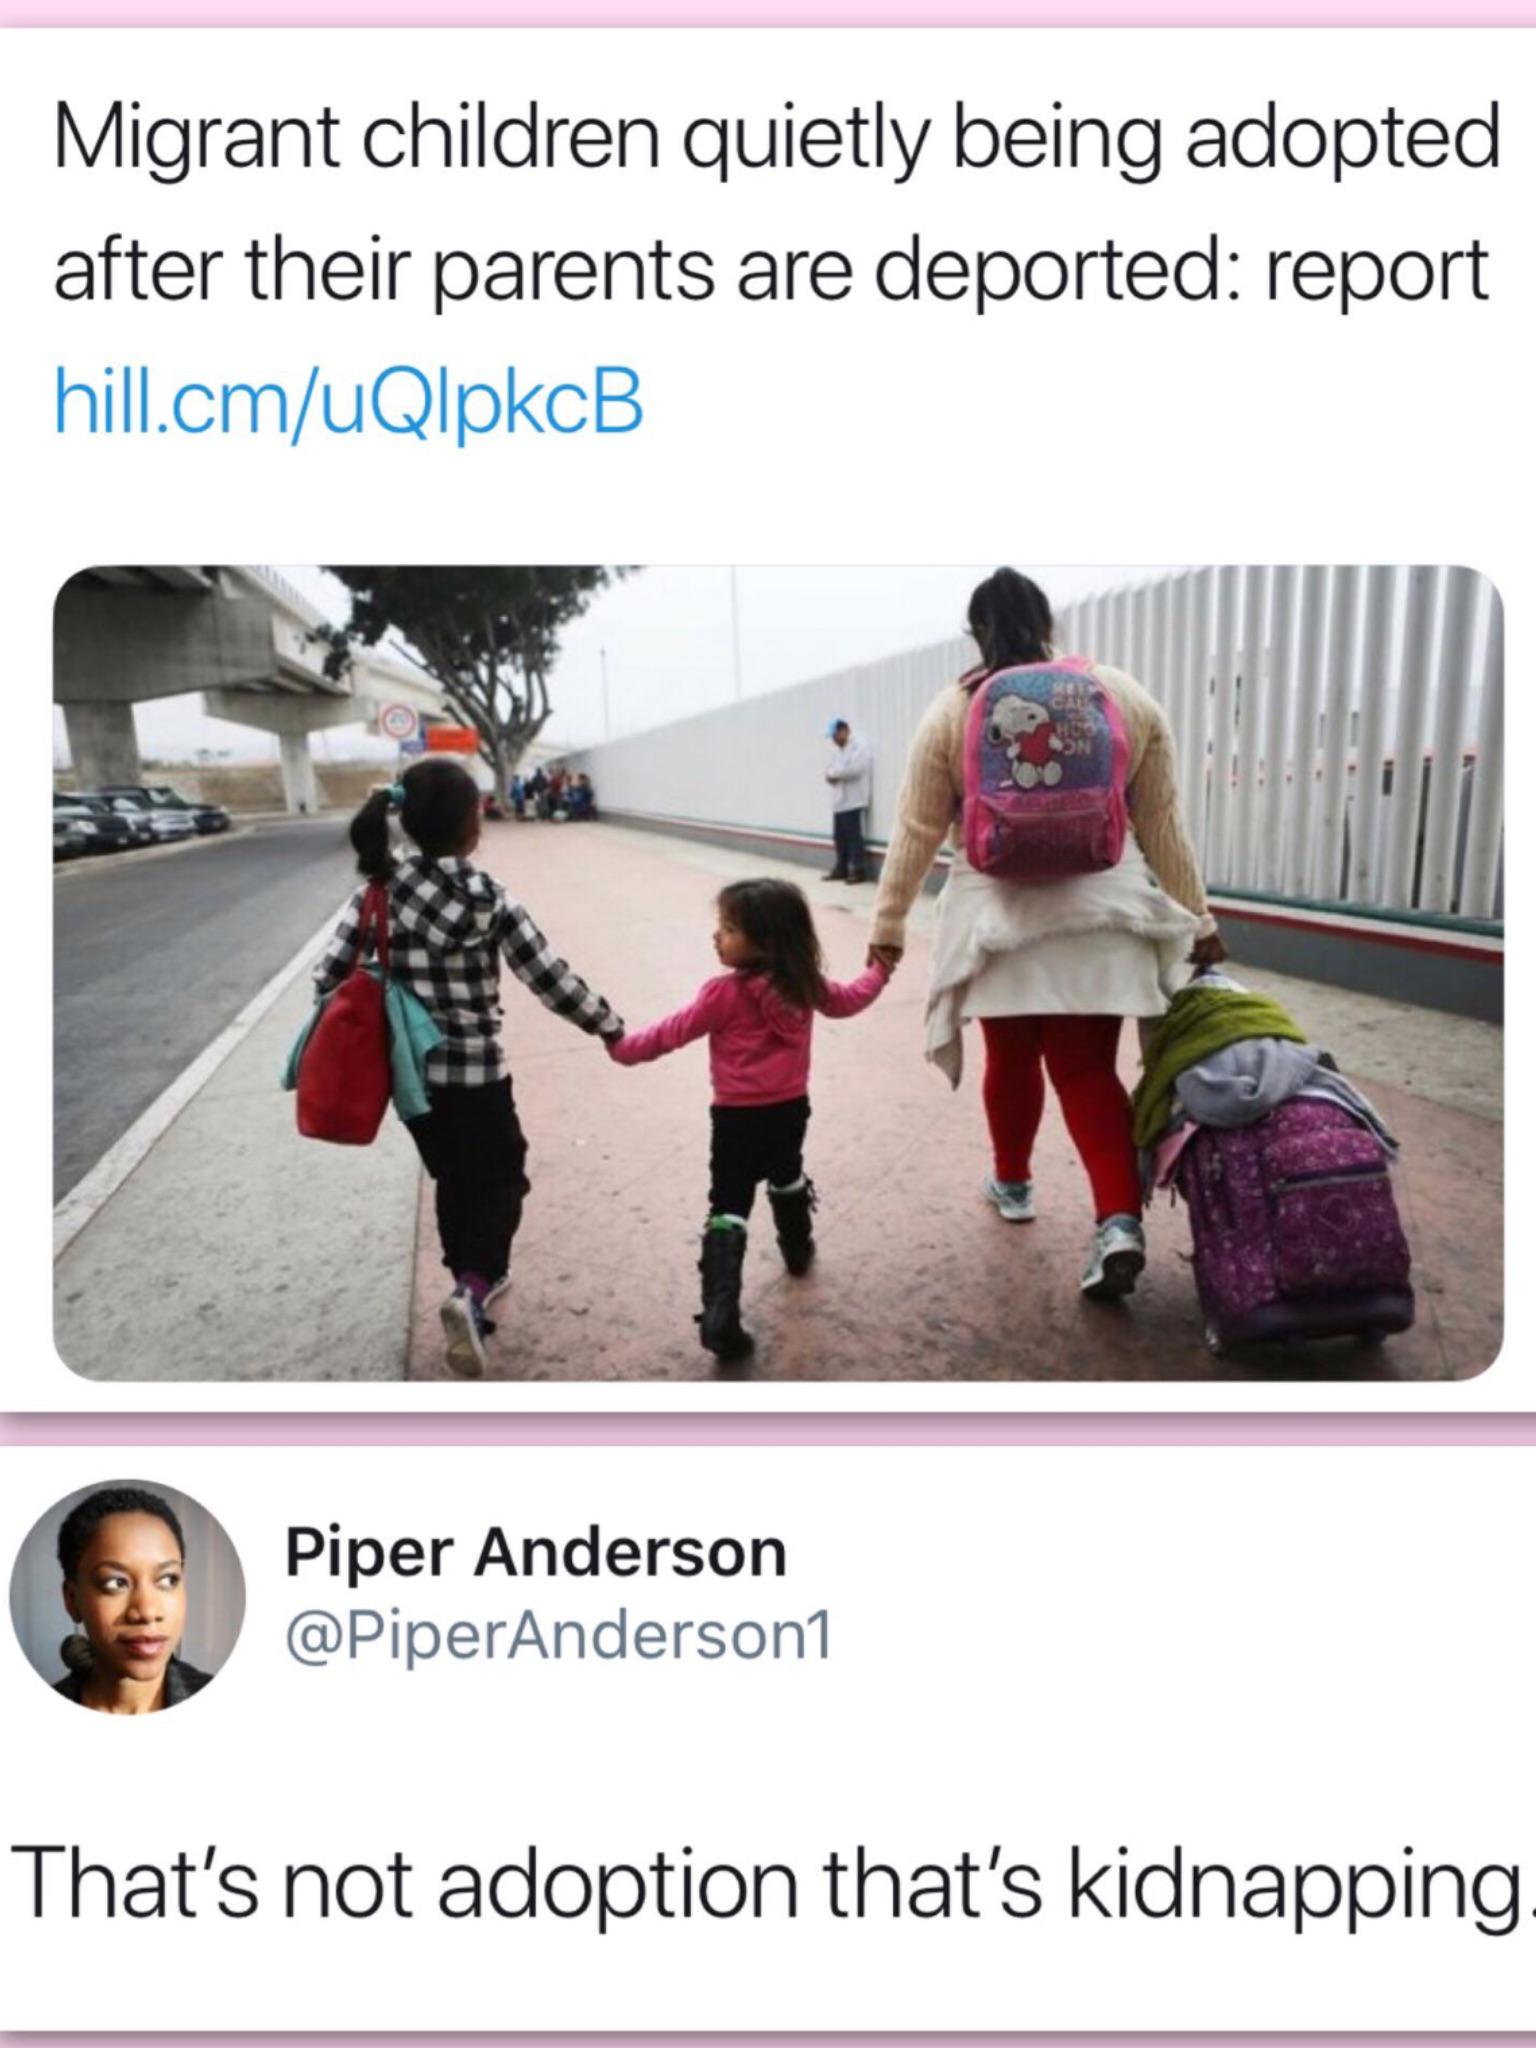 political political-memes political text: Migrant children quietly being adopted after their parents are deported: report hill.cm/uQlpkcB Piper Anderson @PiperAnderson1 That's not adoption that's kidnapping 